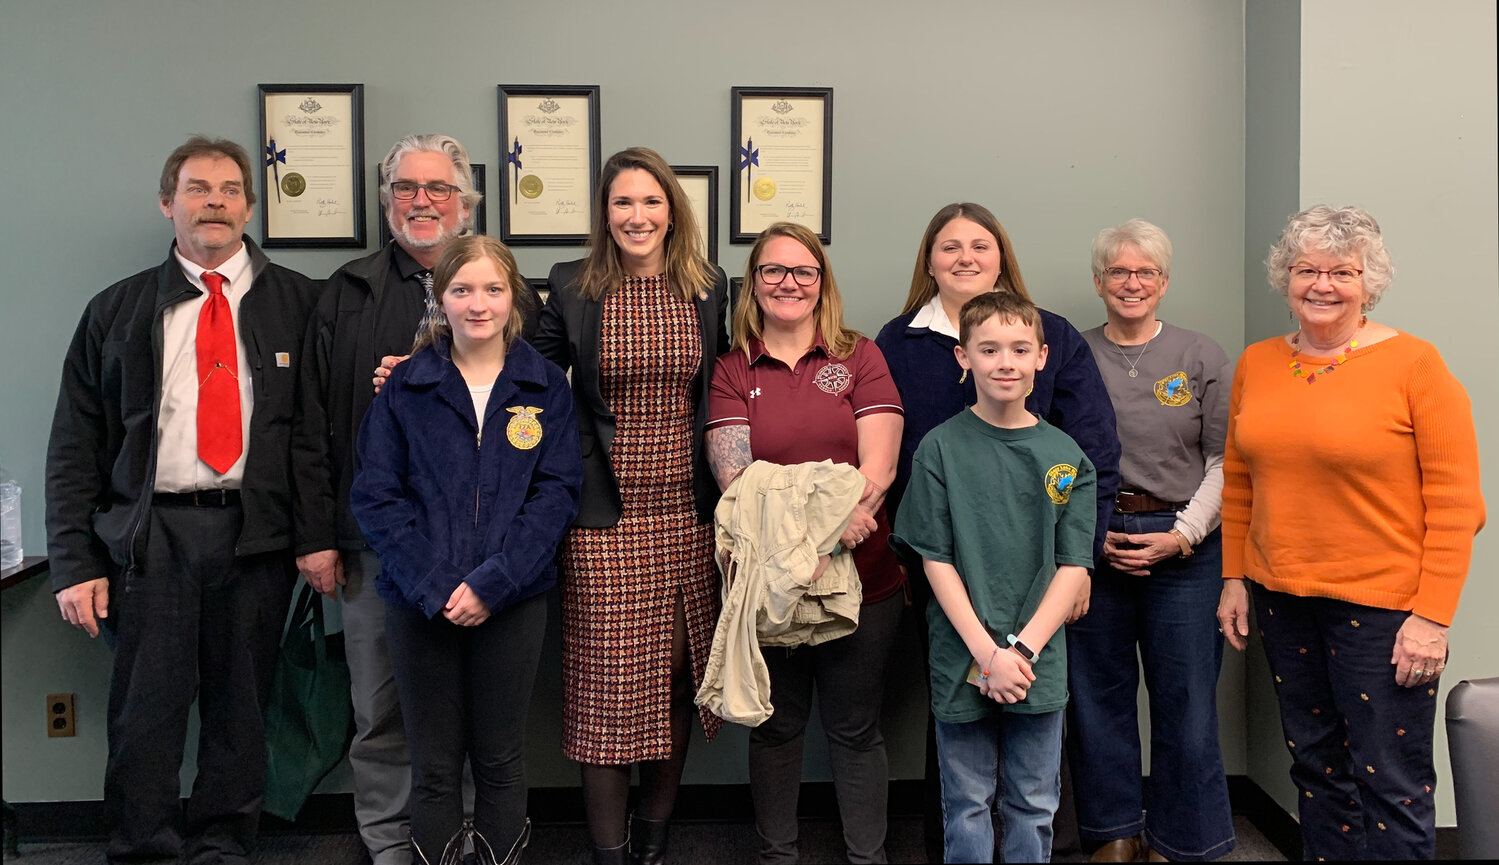 Morgan Williams and Alexes Sousa are pictured with New York State Senator Michelle Hinchey, FFA advisor Amanda Larsen, NYS Maple Producers Association Executive Director Helen Thomas, and other New York maple producers.